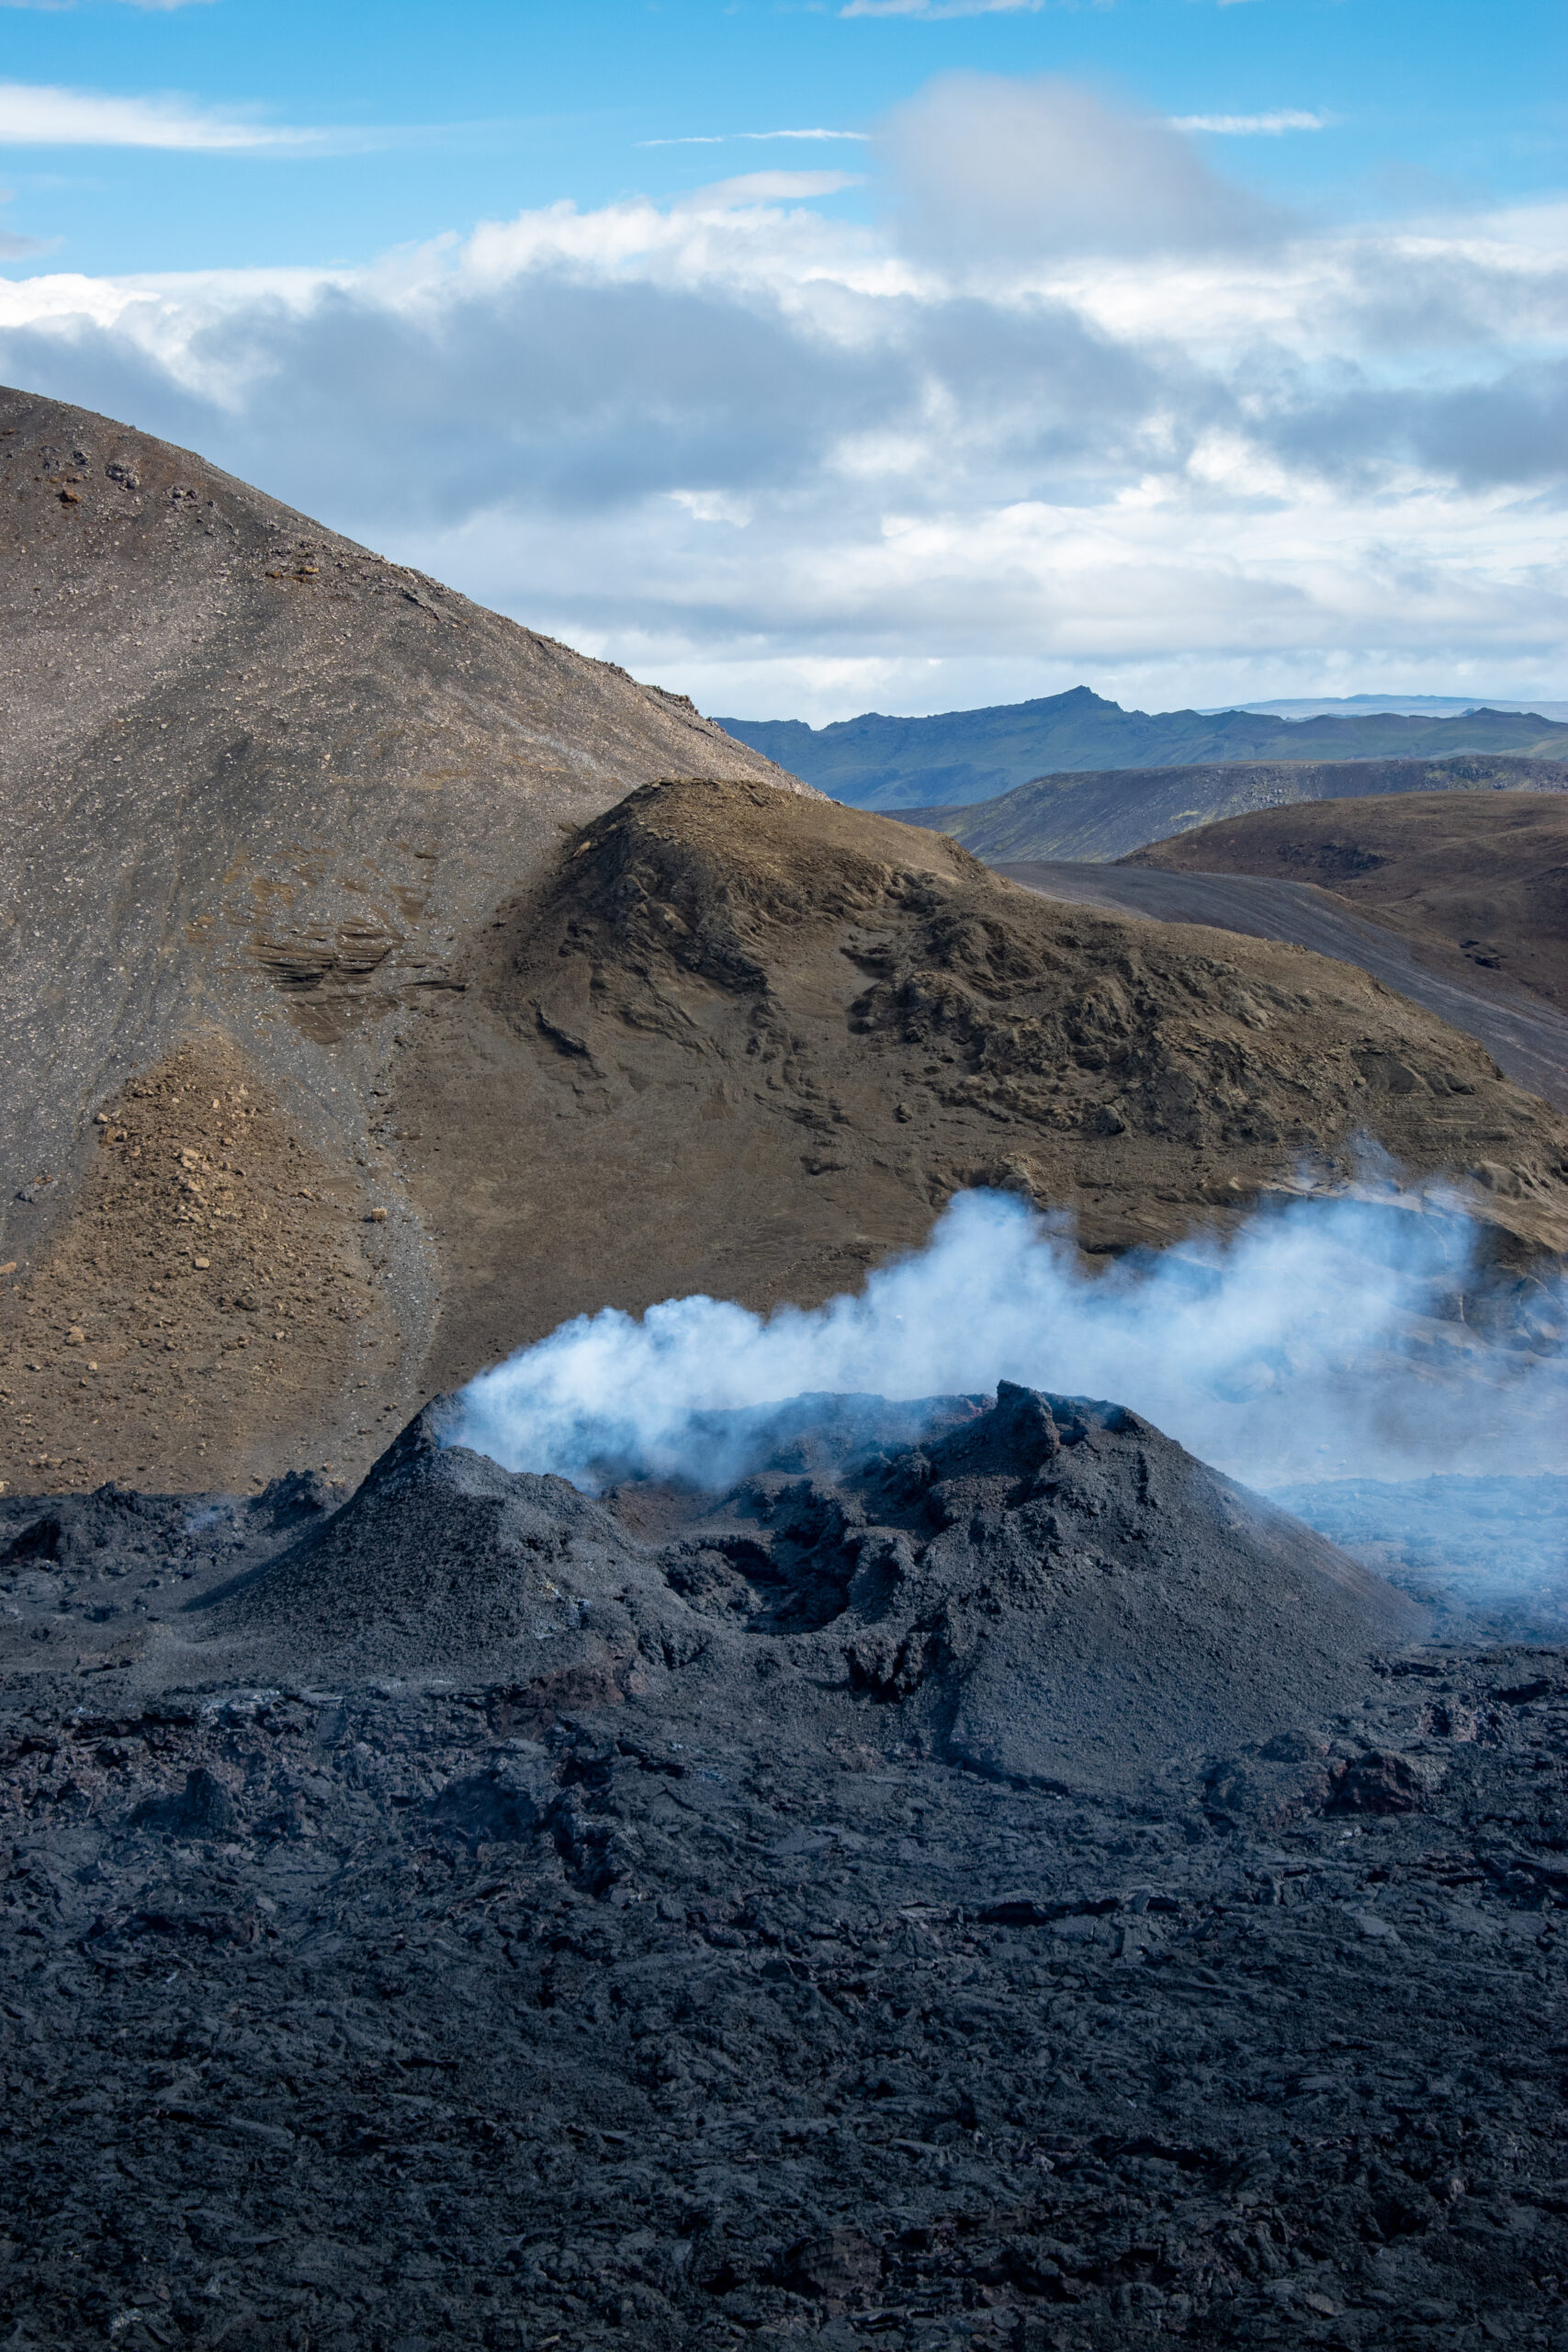 On Saturday, August 20, blue-gray smoke rises from an inactive crater.